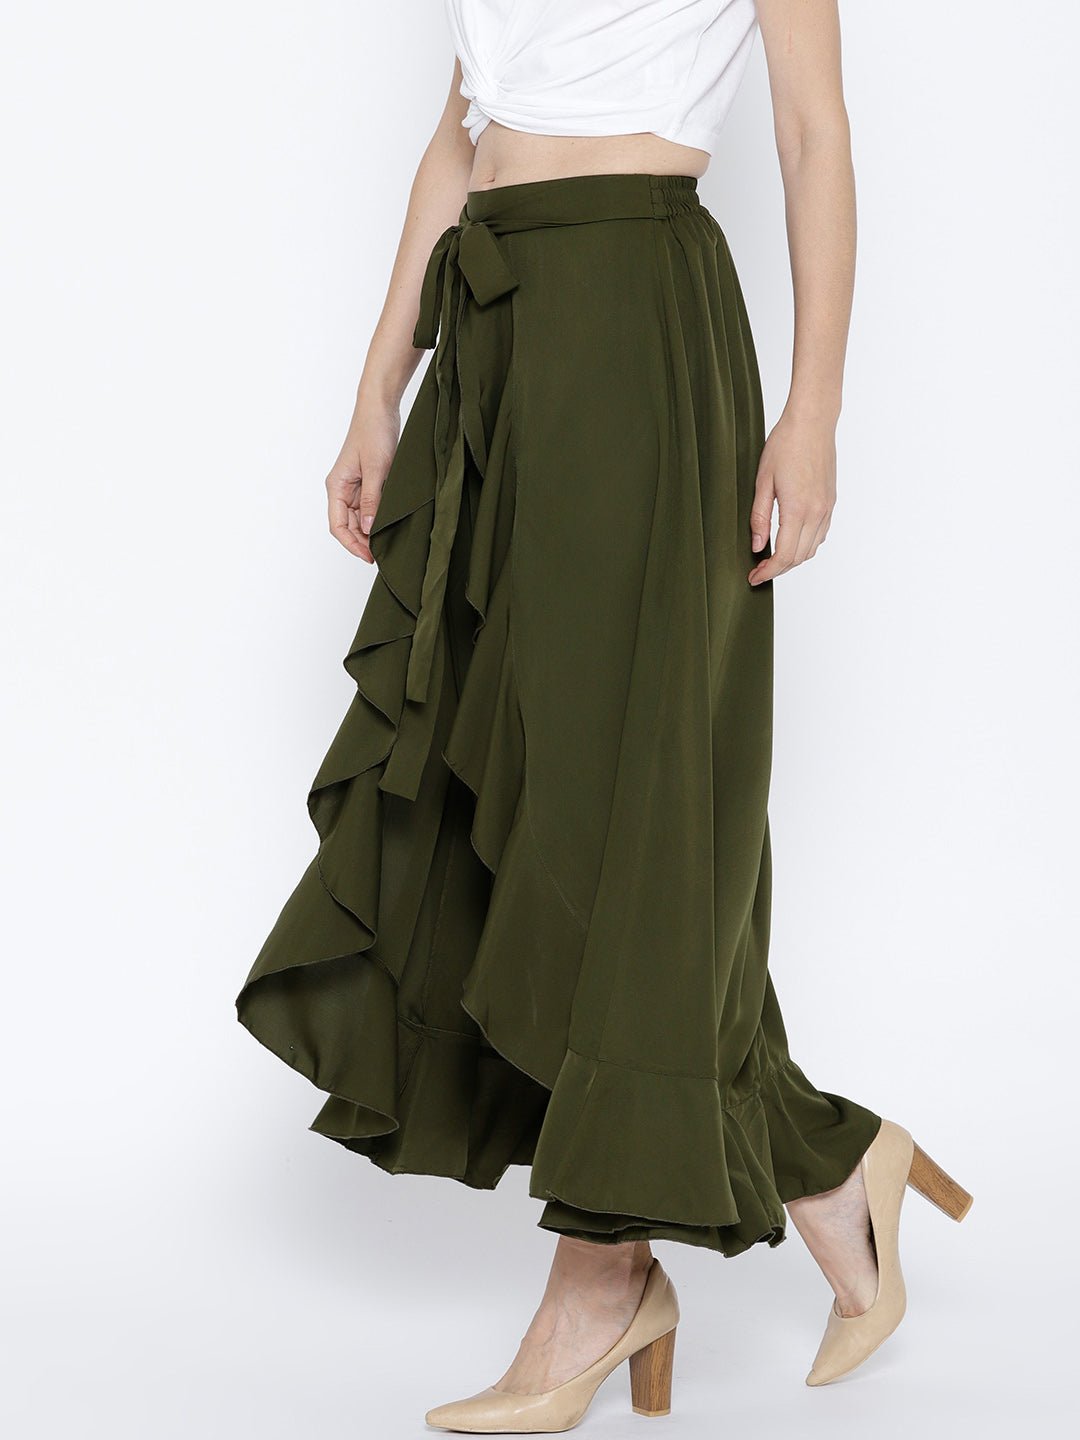 Folk Republic Women Solid Olive Green Waist Tie-Up Ruffled Maxi Skirt with Attached Trousers - #folk republic#